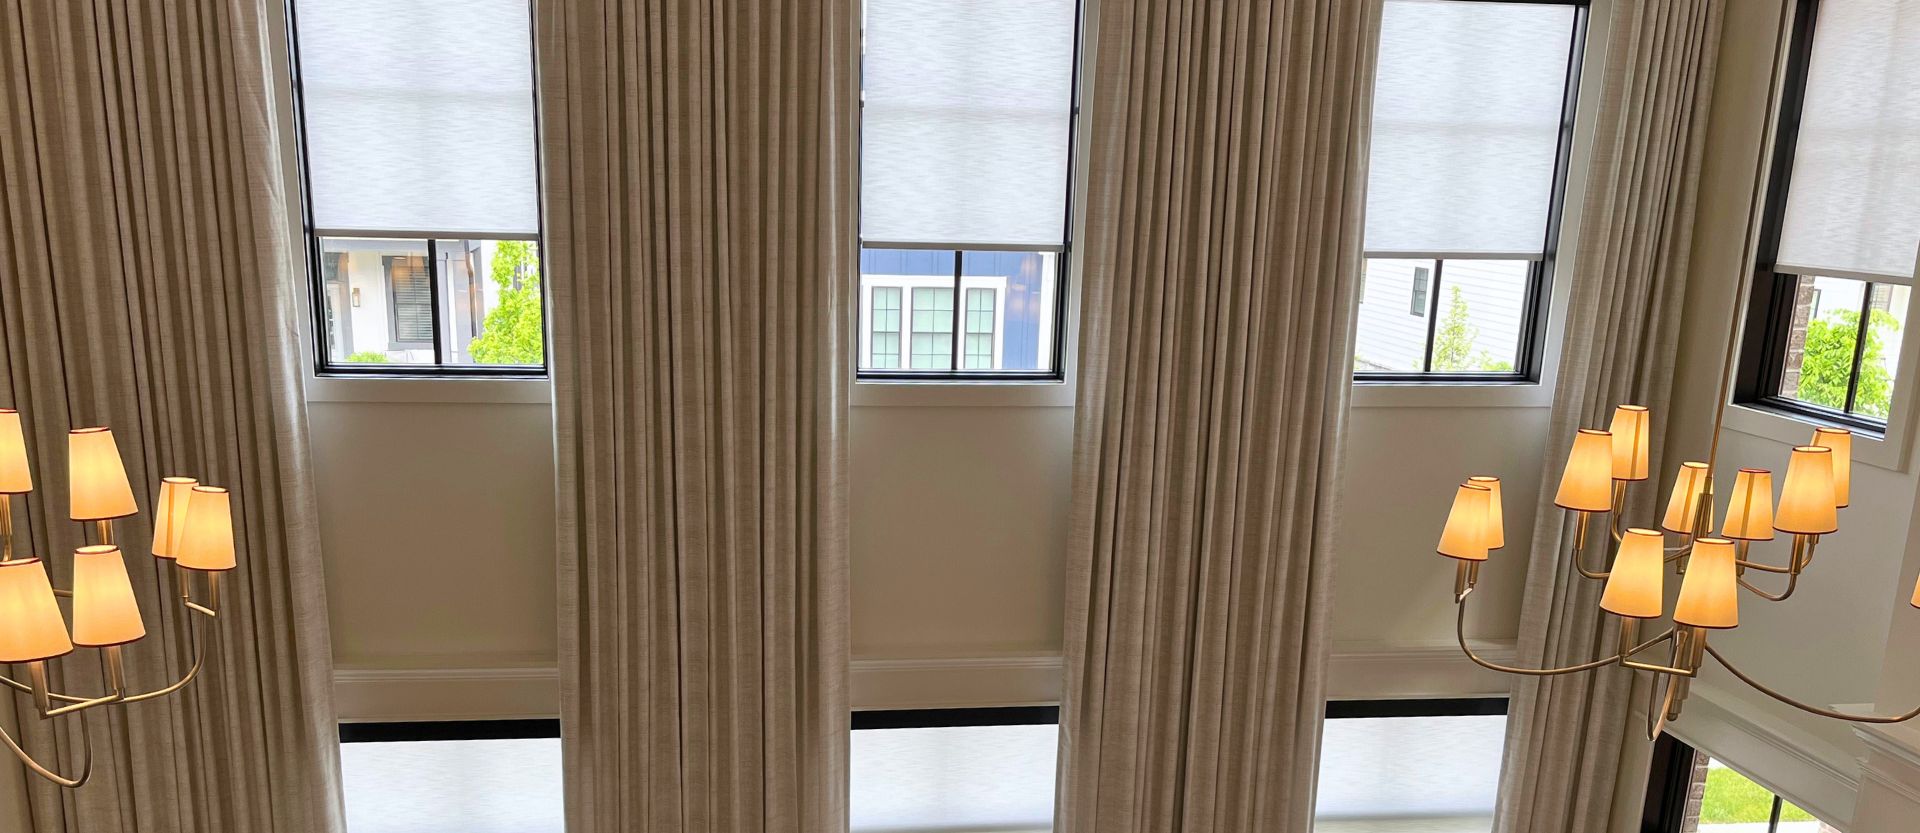 two story drapes